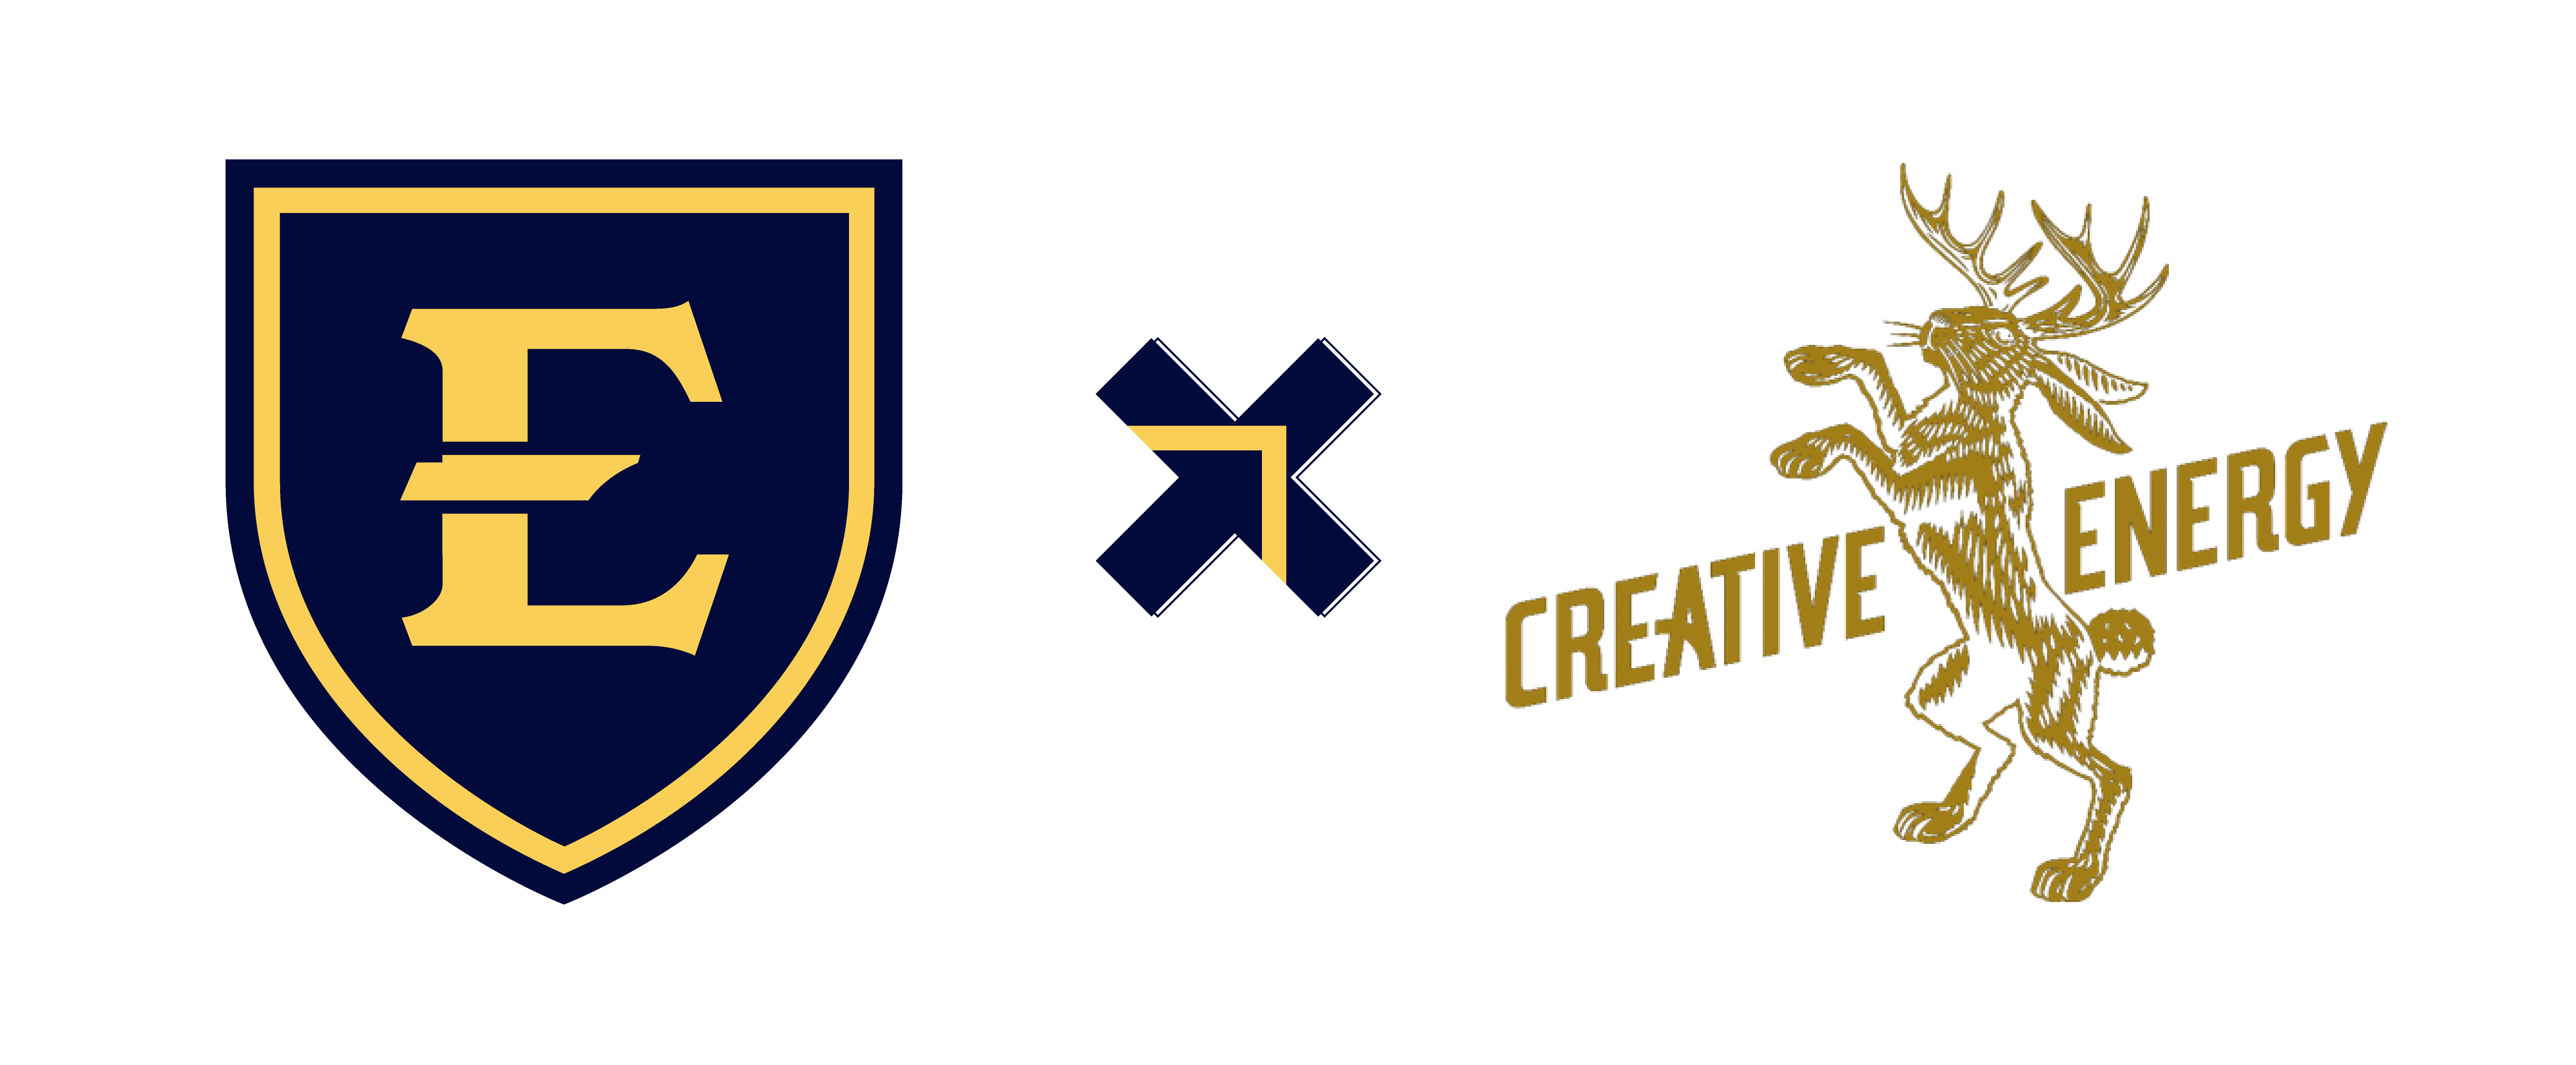 ETSU Shield and Creative Energy logos joined by a multiplier graphic